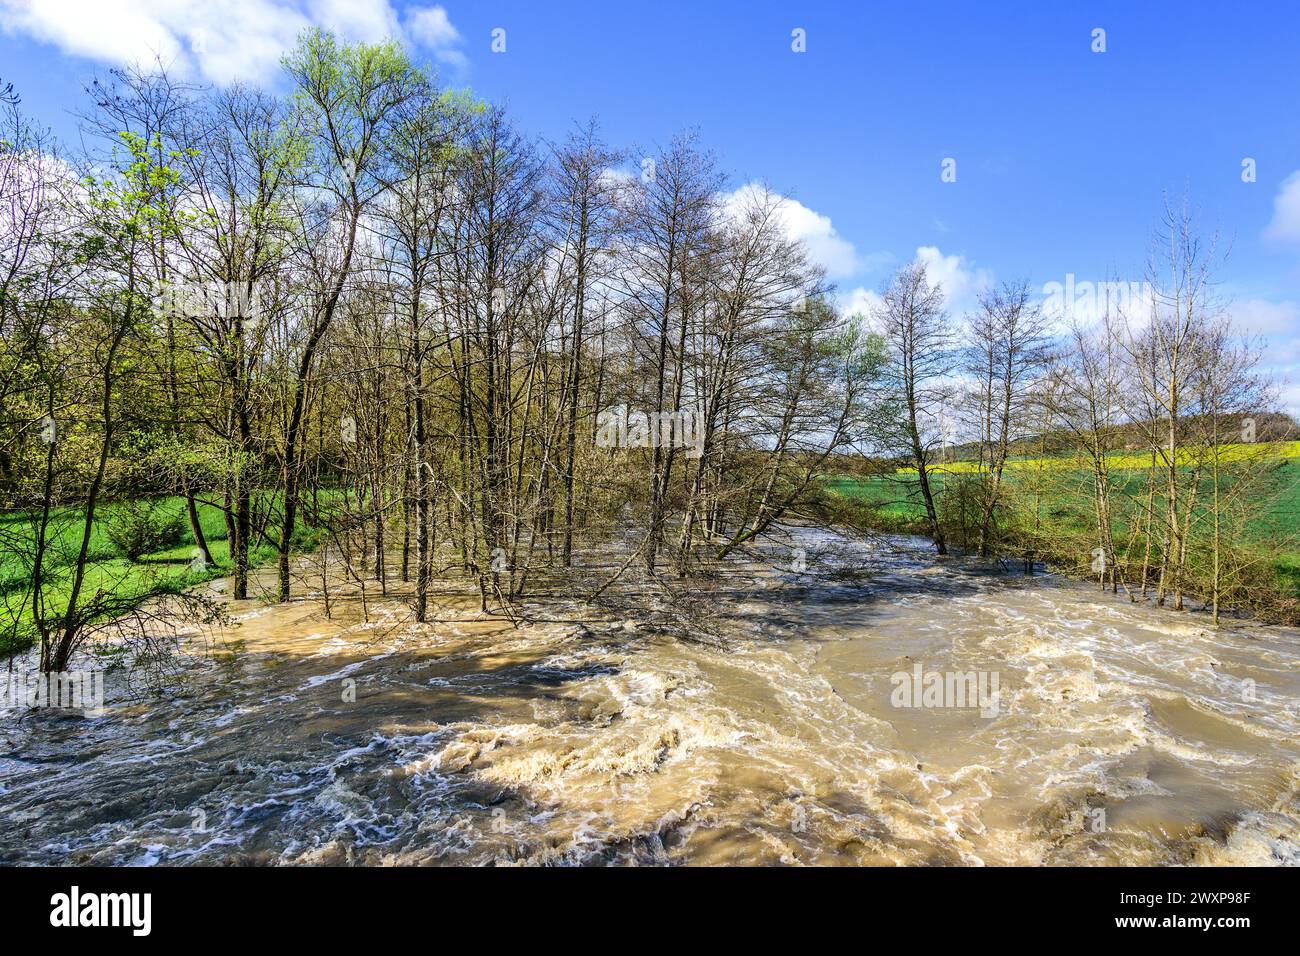 Floodwaters from the river Claise bursting it's banks after 'Red Alert' heavy rain - Preuilly-sur-Claise, Indre-et-Loire (37), France. Stock Photo